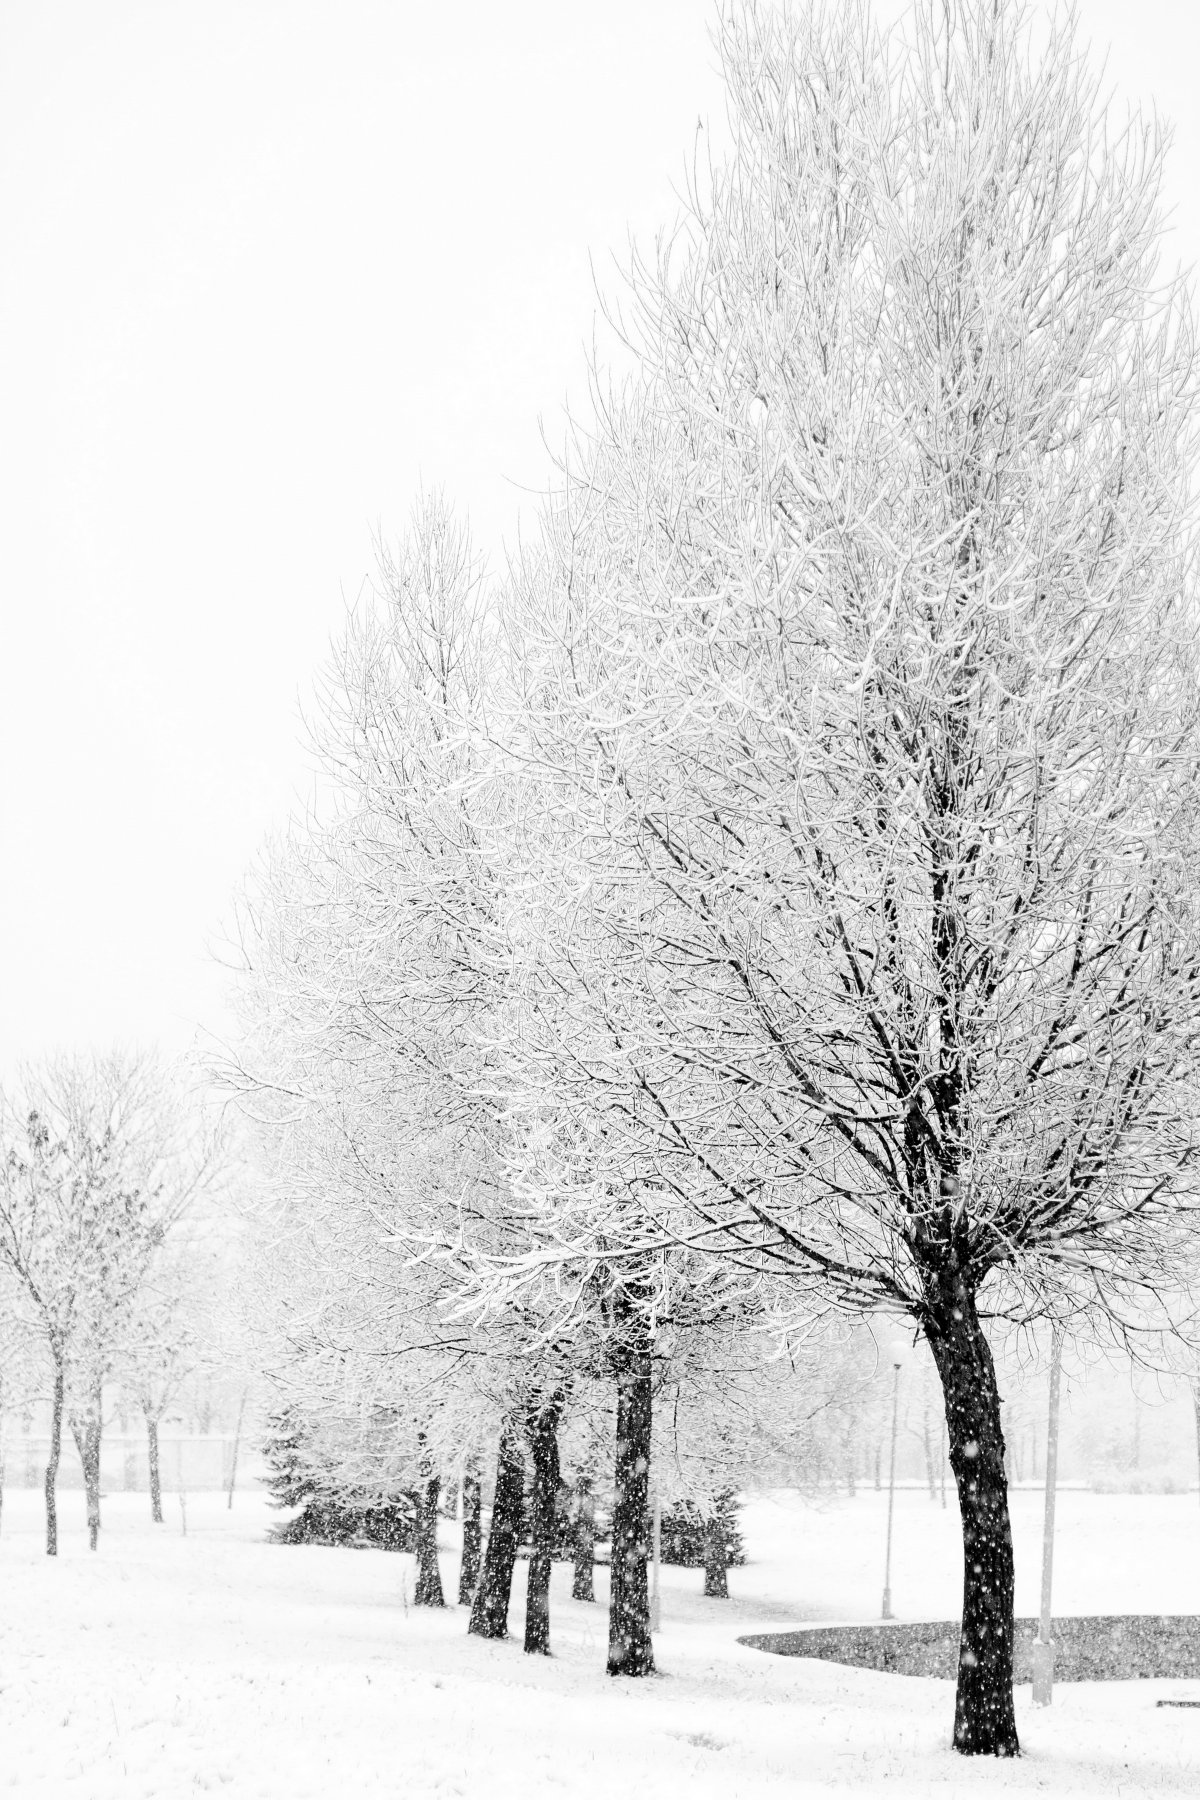 Snowy scenery pictures in winter